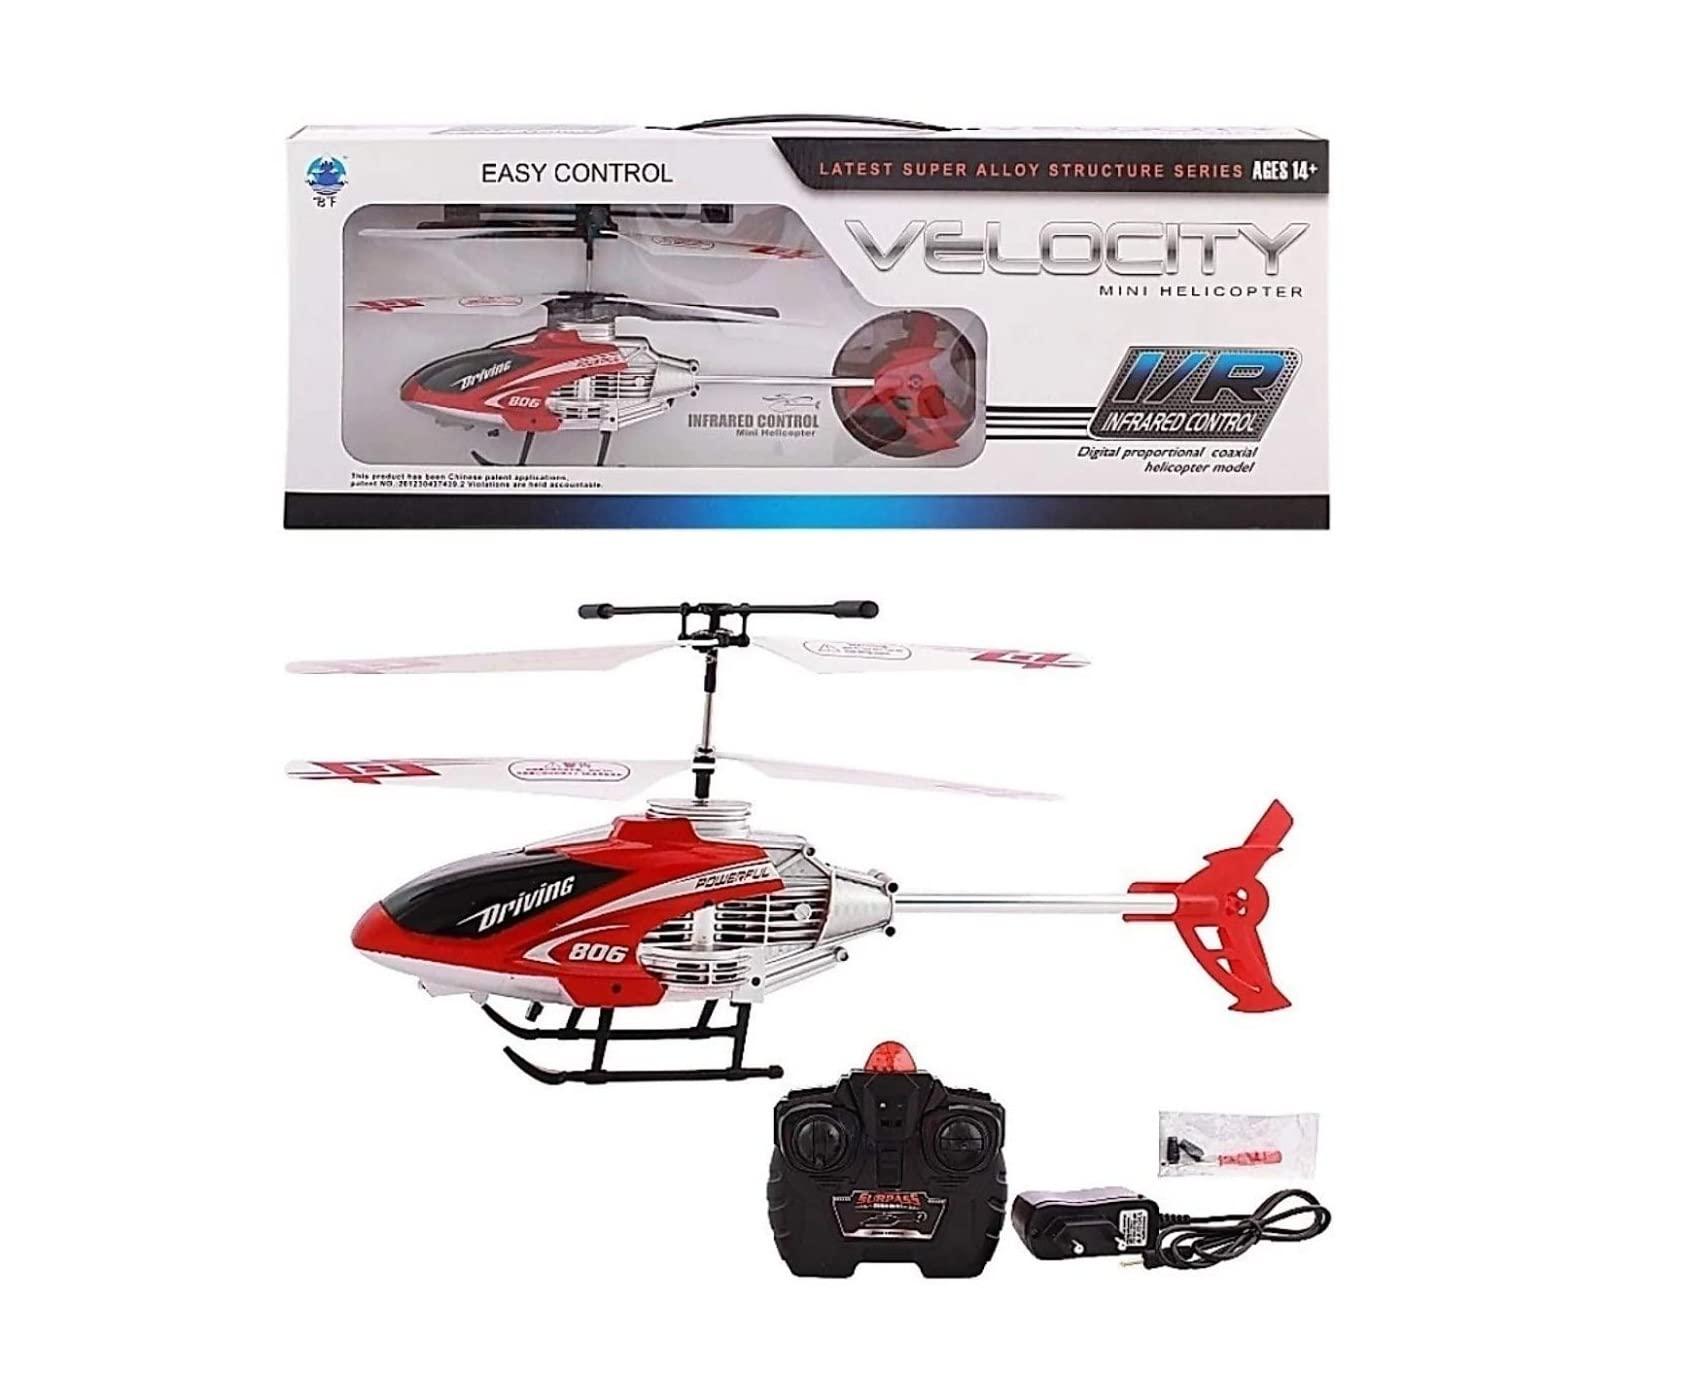 Rc Big Size Helicopter: Top-Rated RC Big Size Helicopter Models: Features, Qualities, and Advice for Purchasing.